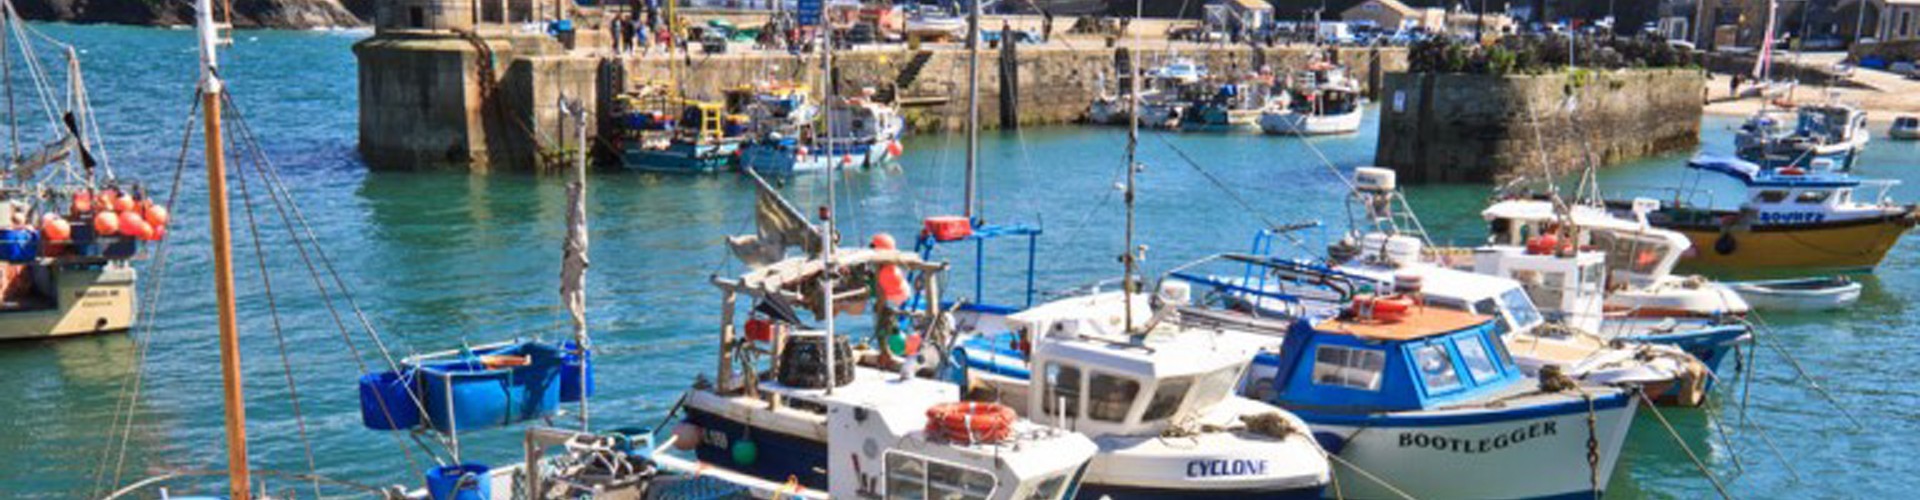 newquay harbour